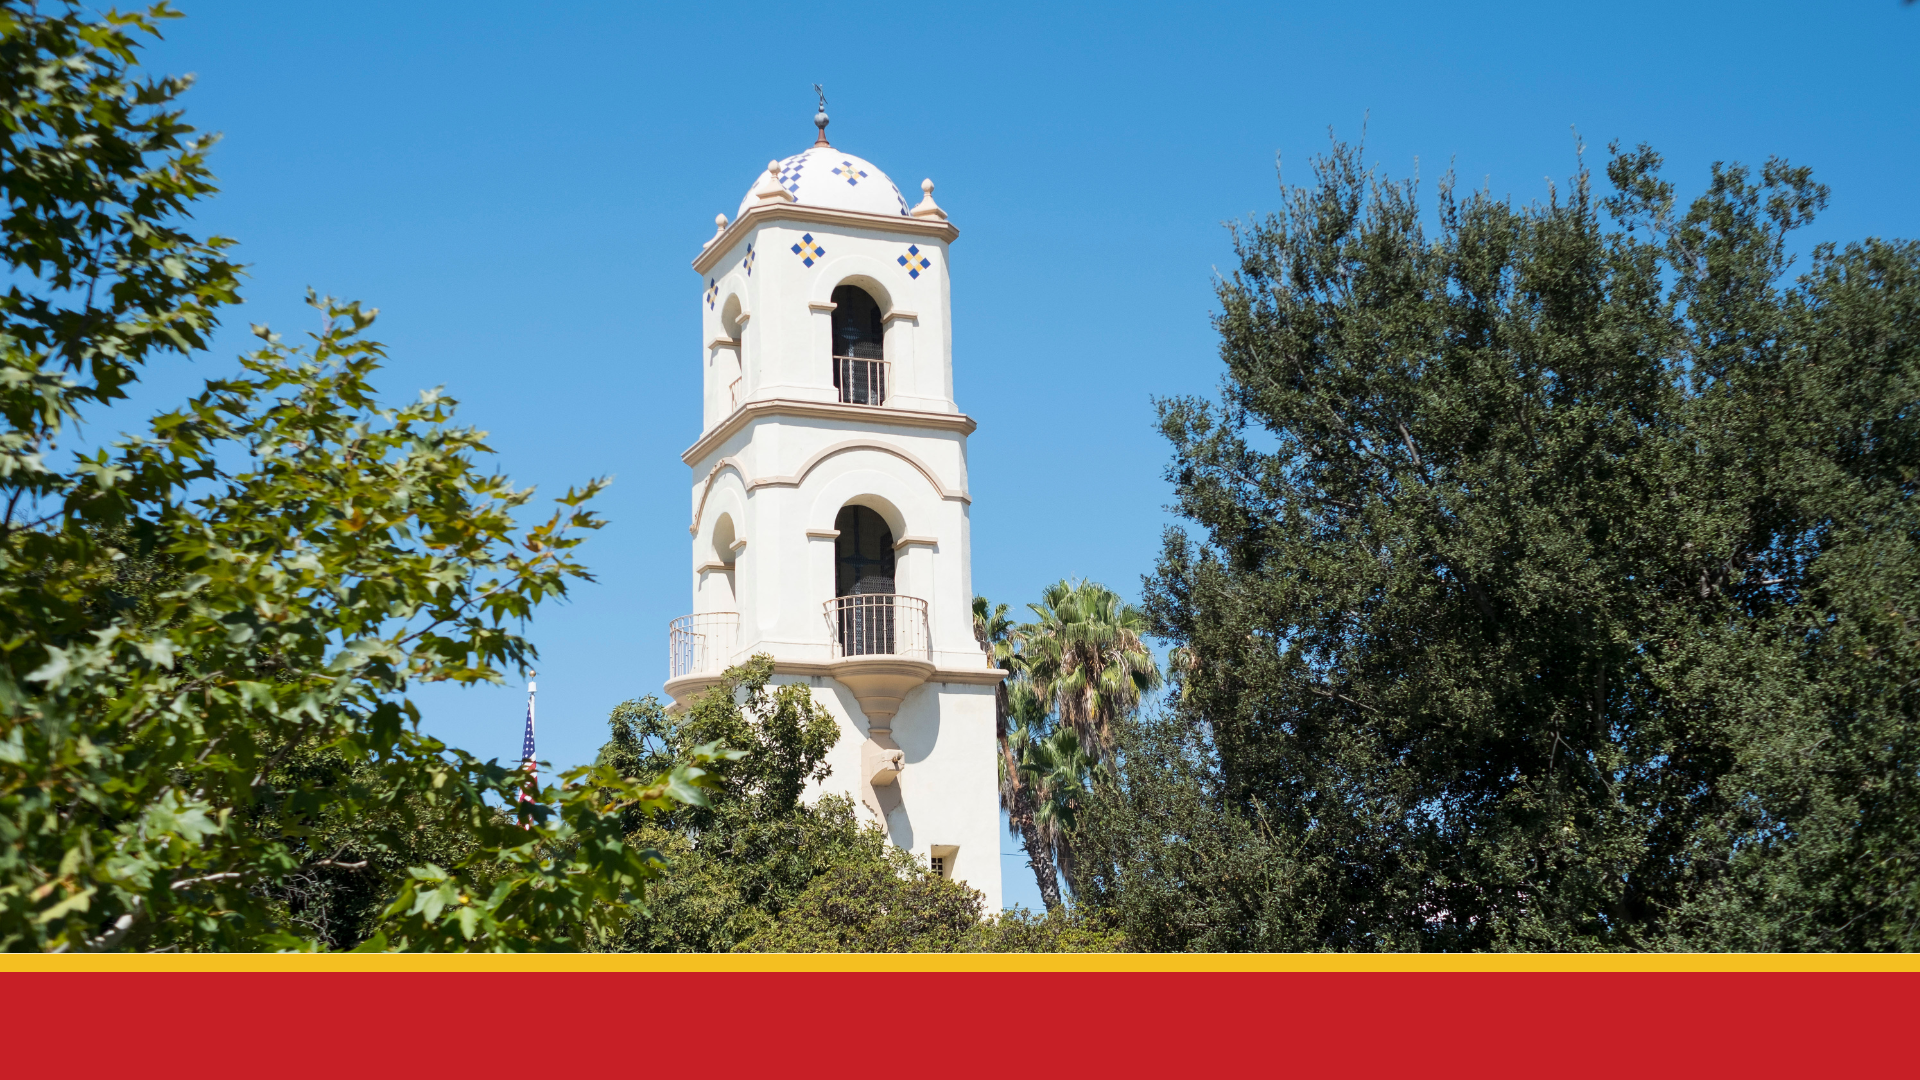 The historic bell tower in Ojai, CA